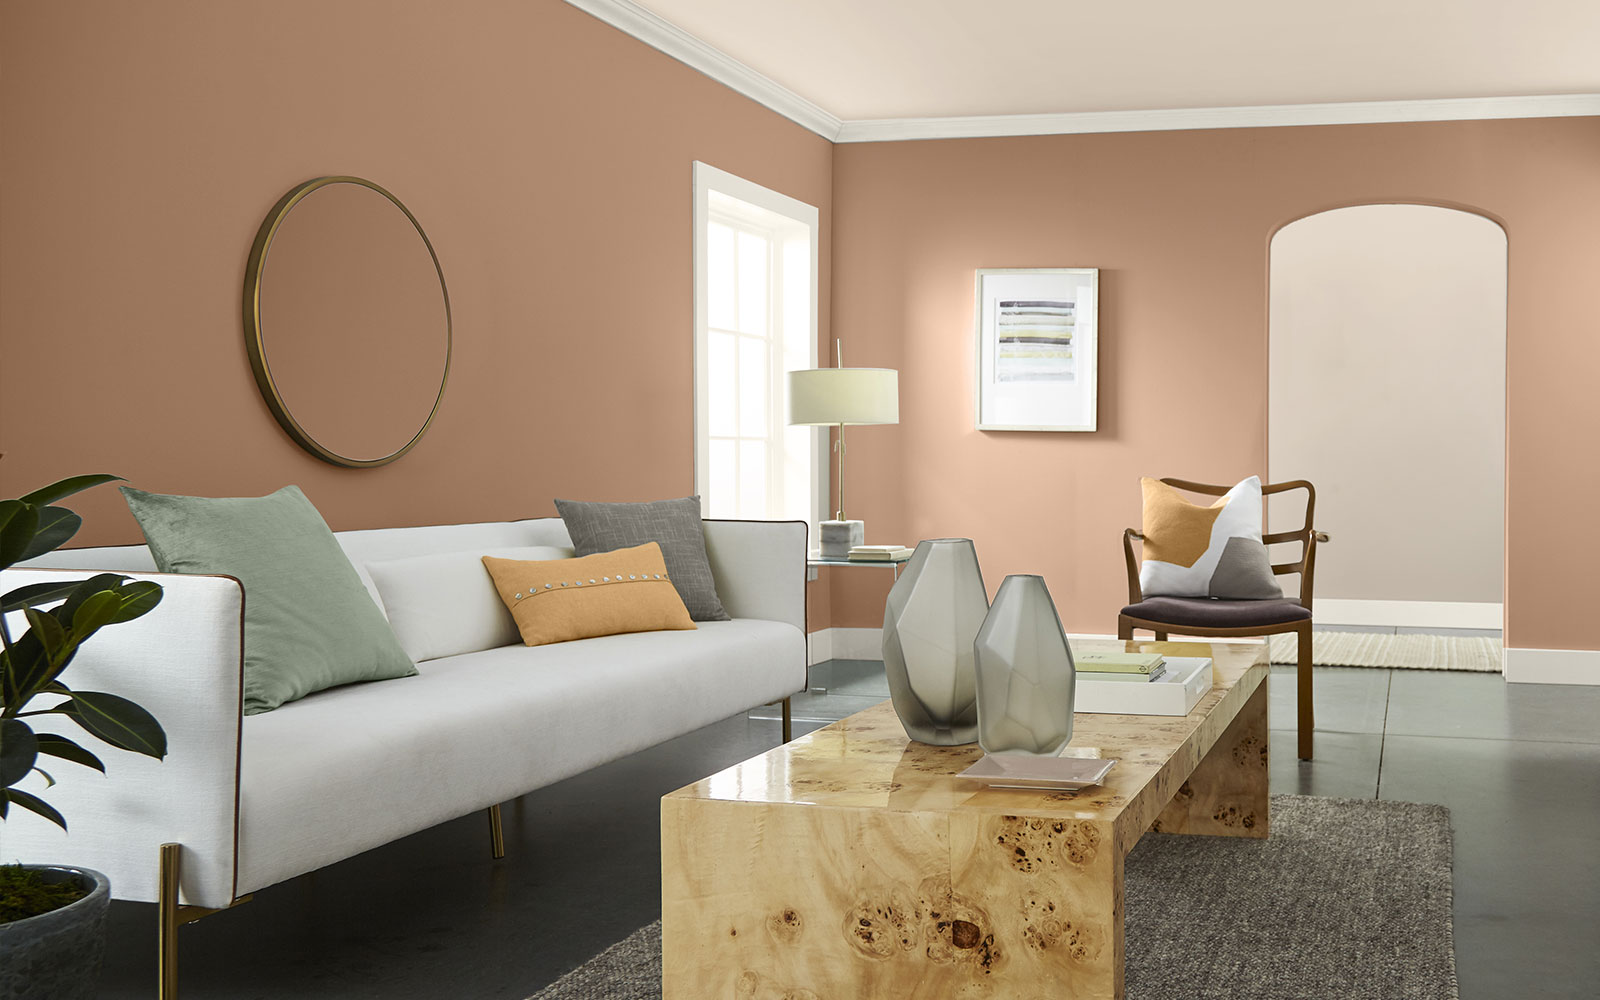 A living room image with four color swatches sitting beside it. The image displays the four colors: a light, but bright clean orange hue for a pillow  on the couch, a dusty orange hue is used on the wall, a creamy white hue is used for the trim, ceiling and couch, and a minty green is used for a pillow.